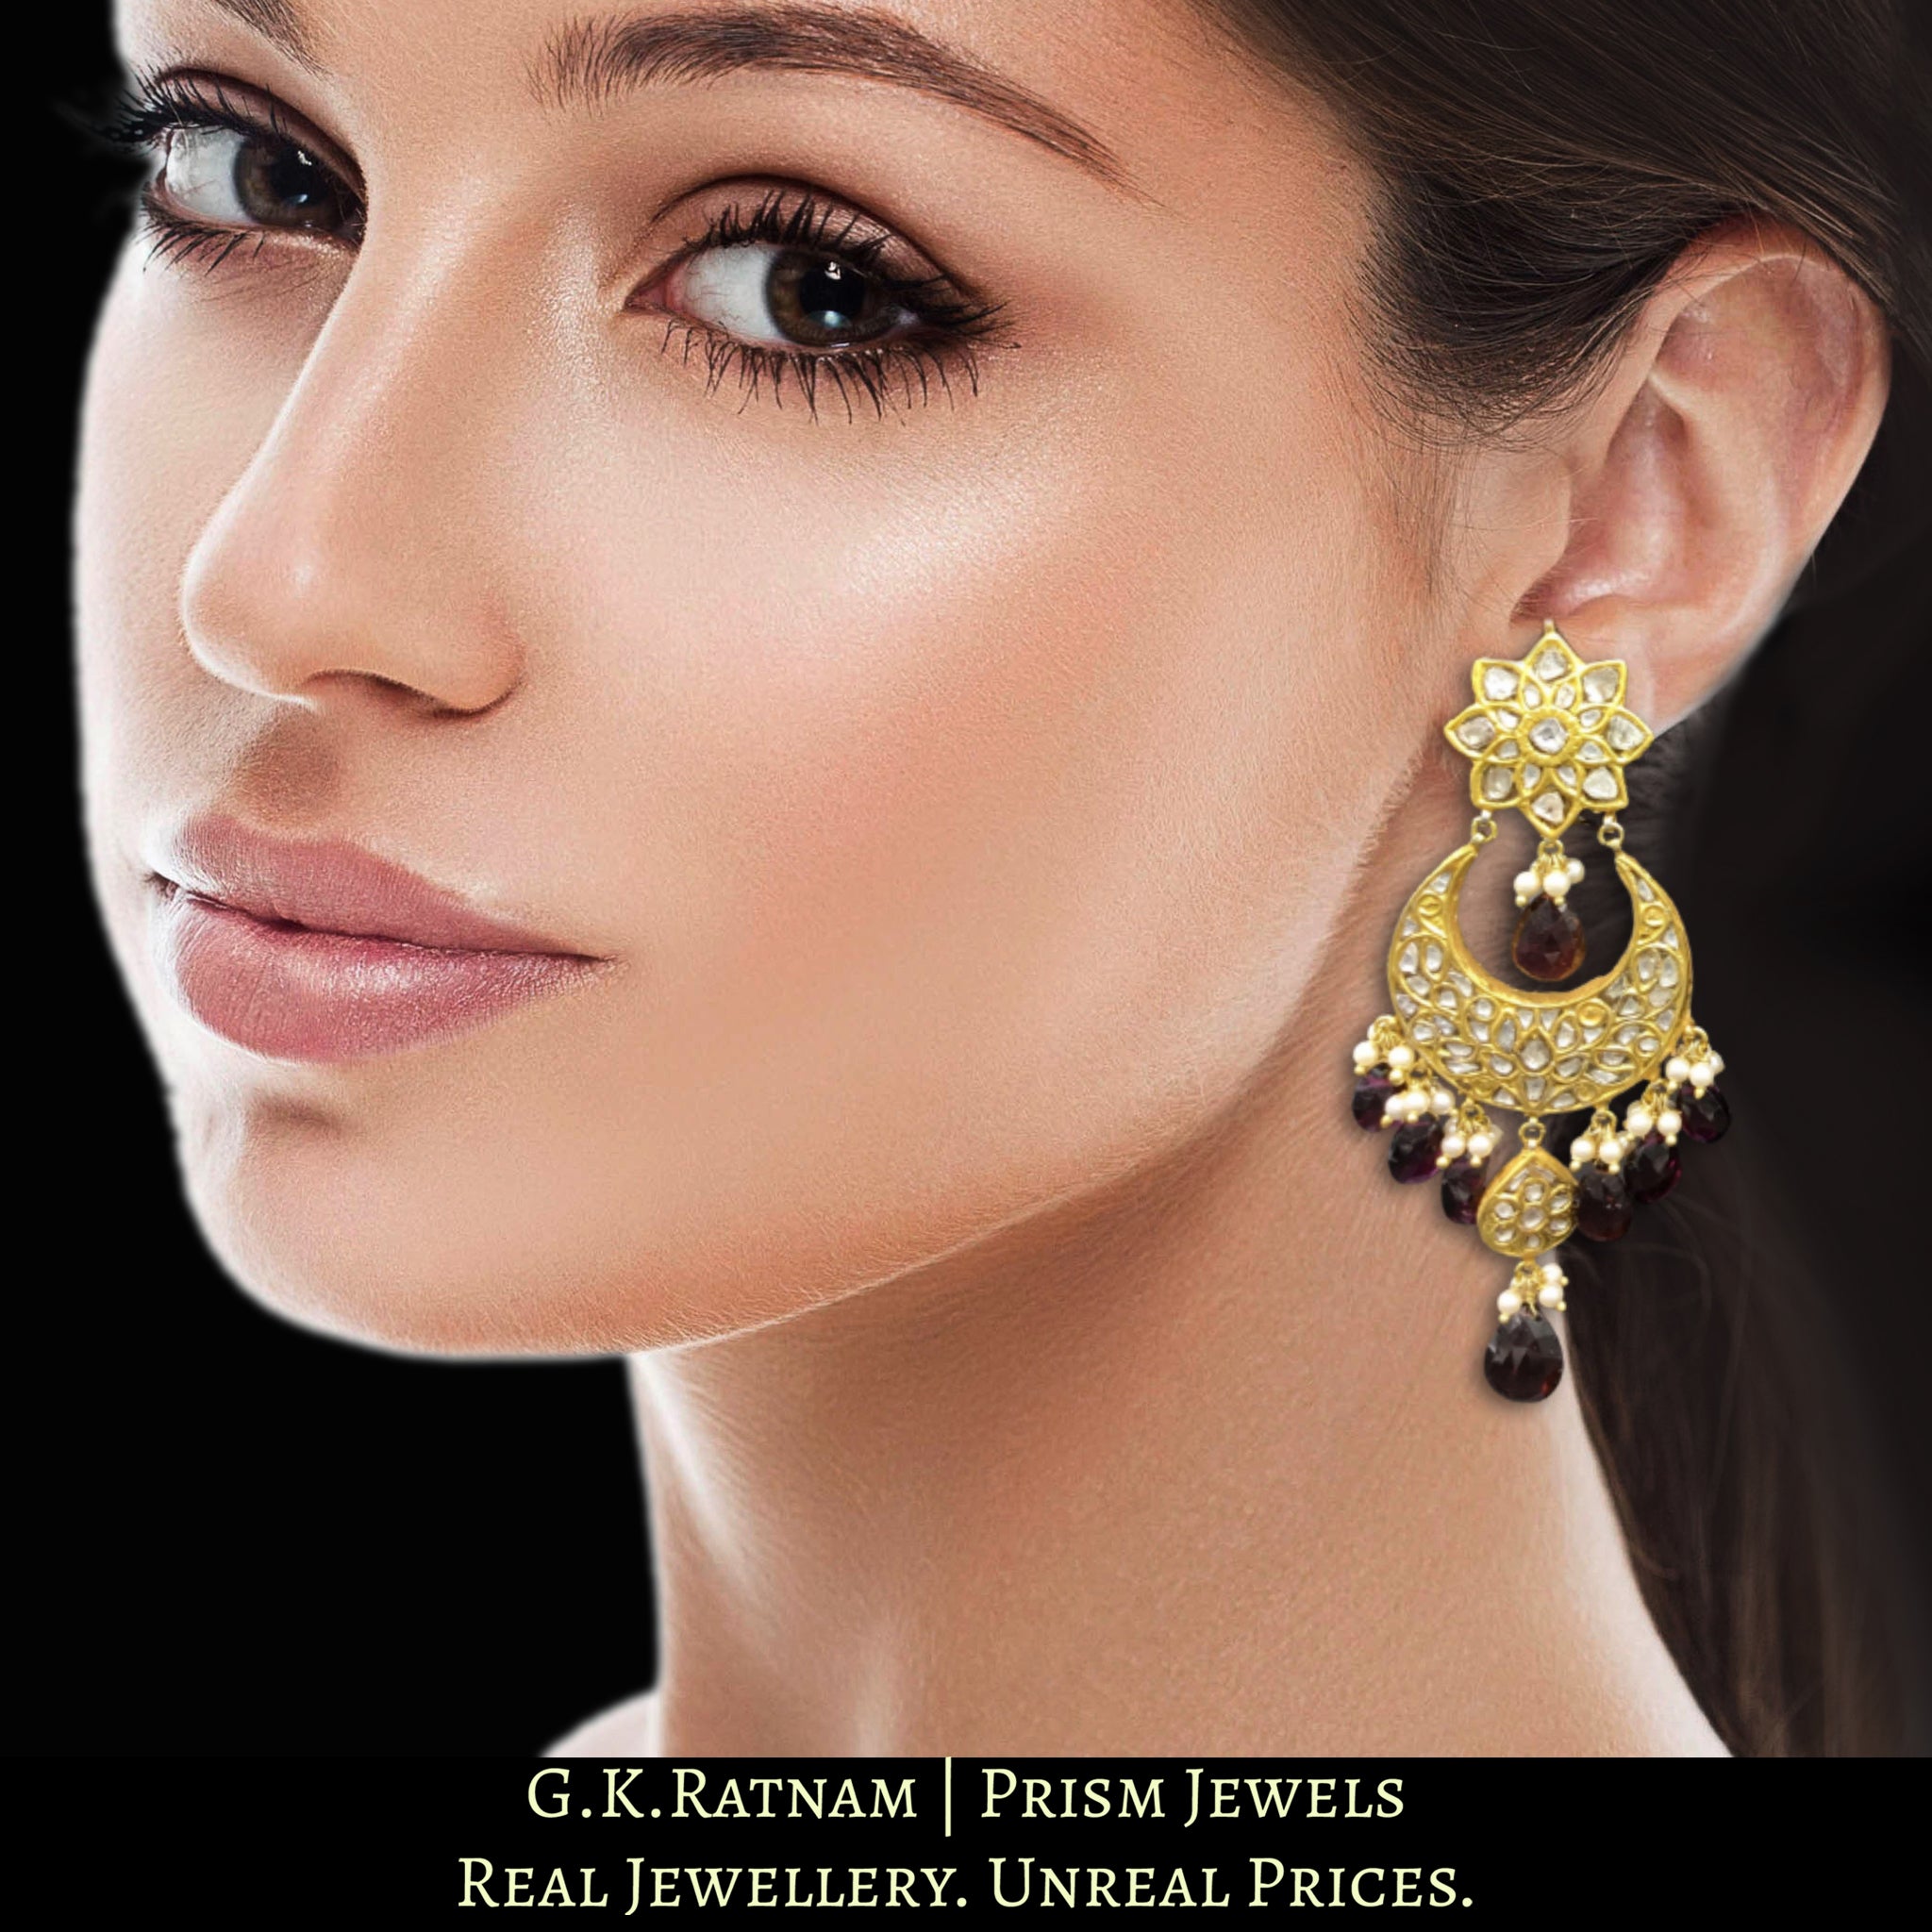 23k Gold and Diamond Polki Chand Bali Earring Pair with Mozambique Garnets